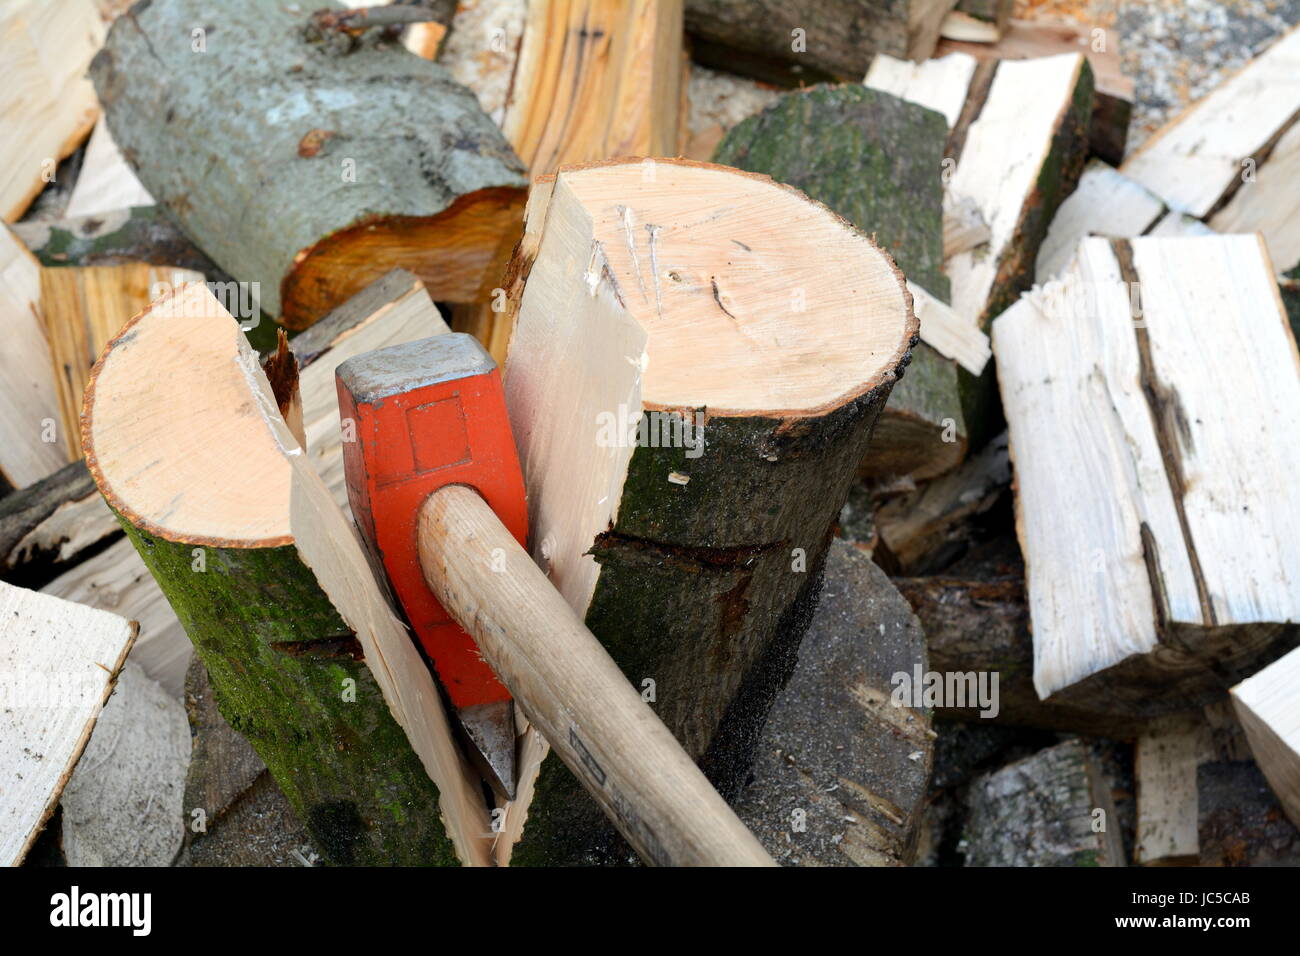 brenholz chop with spalthammer Stock Photo